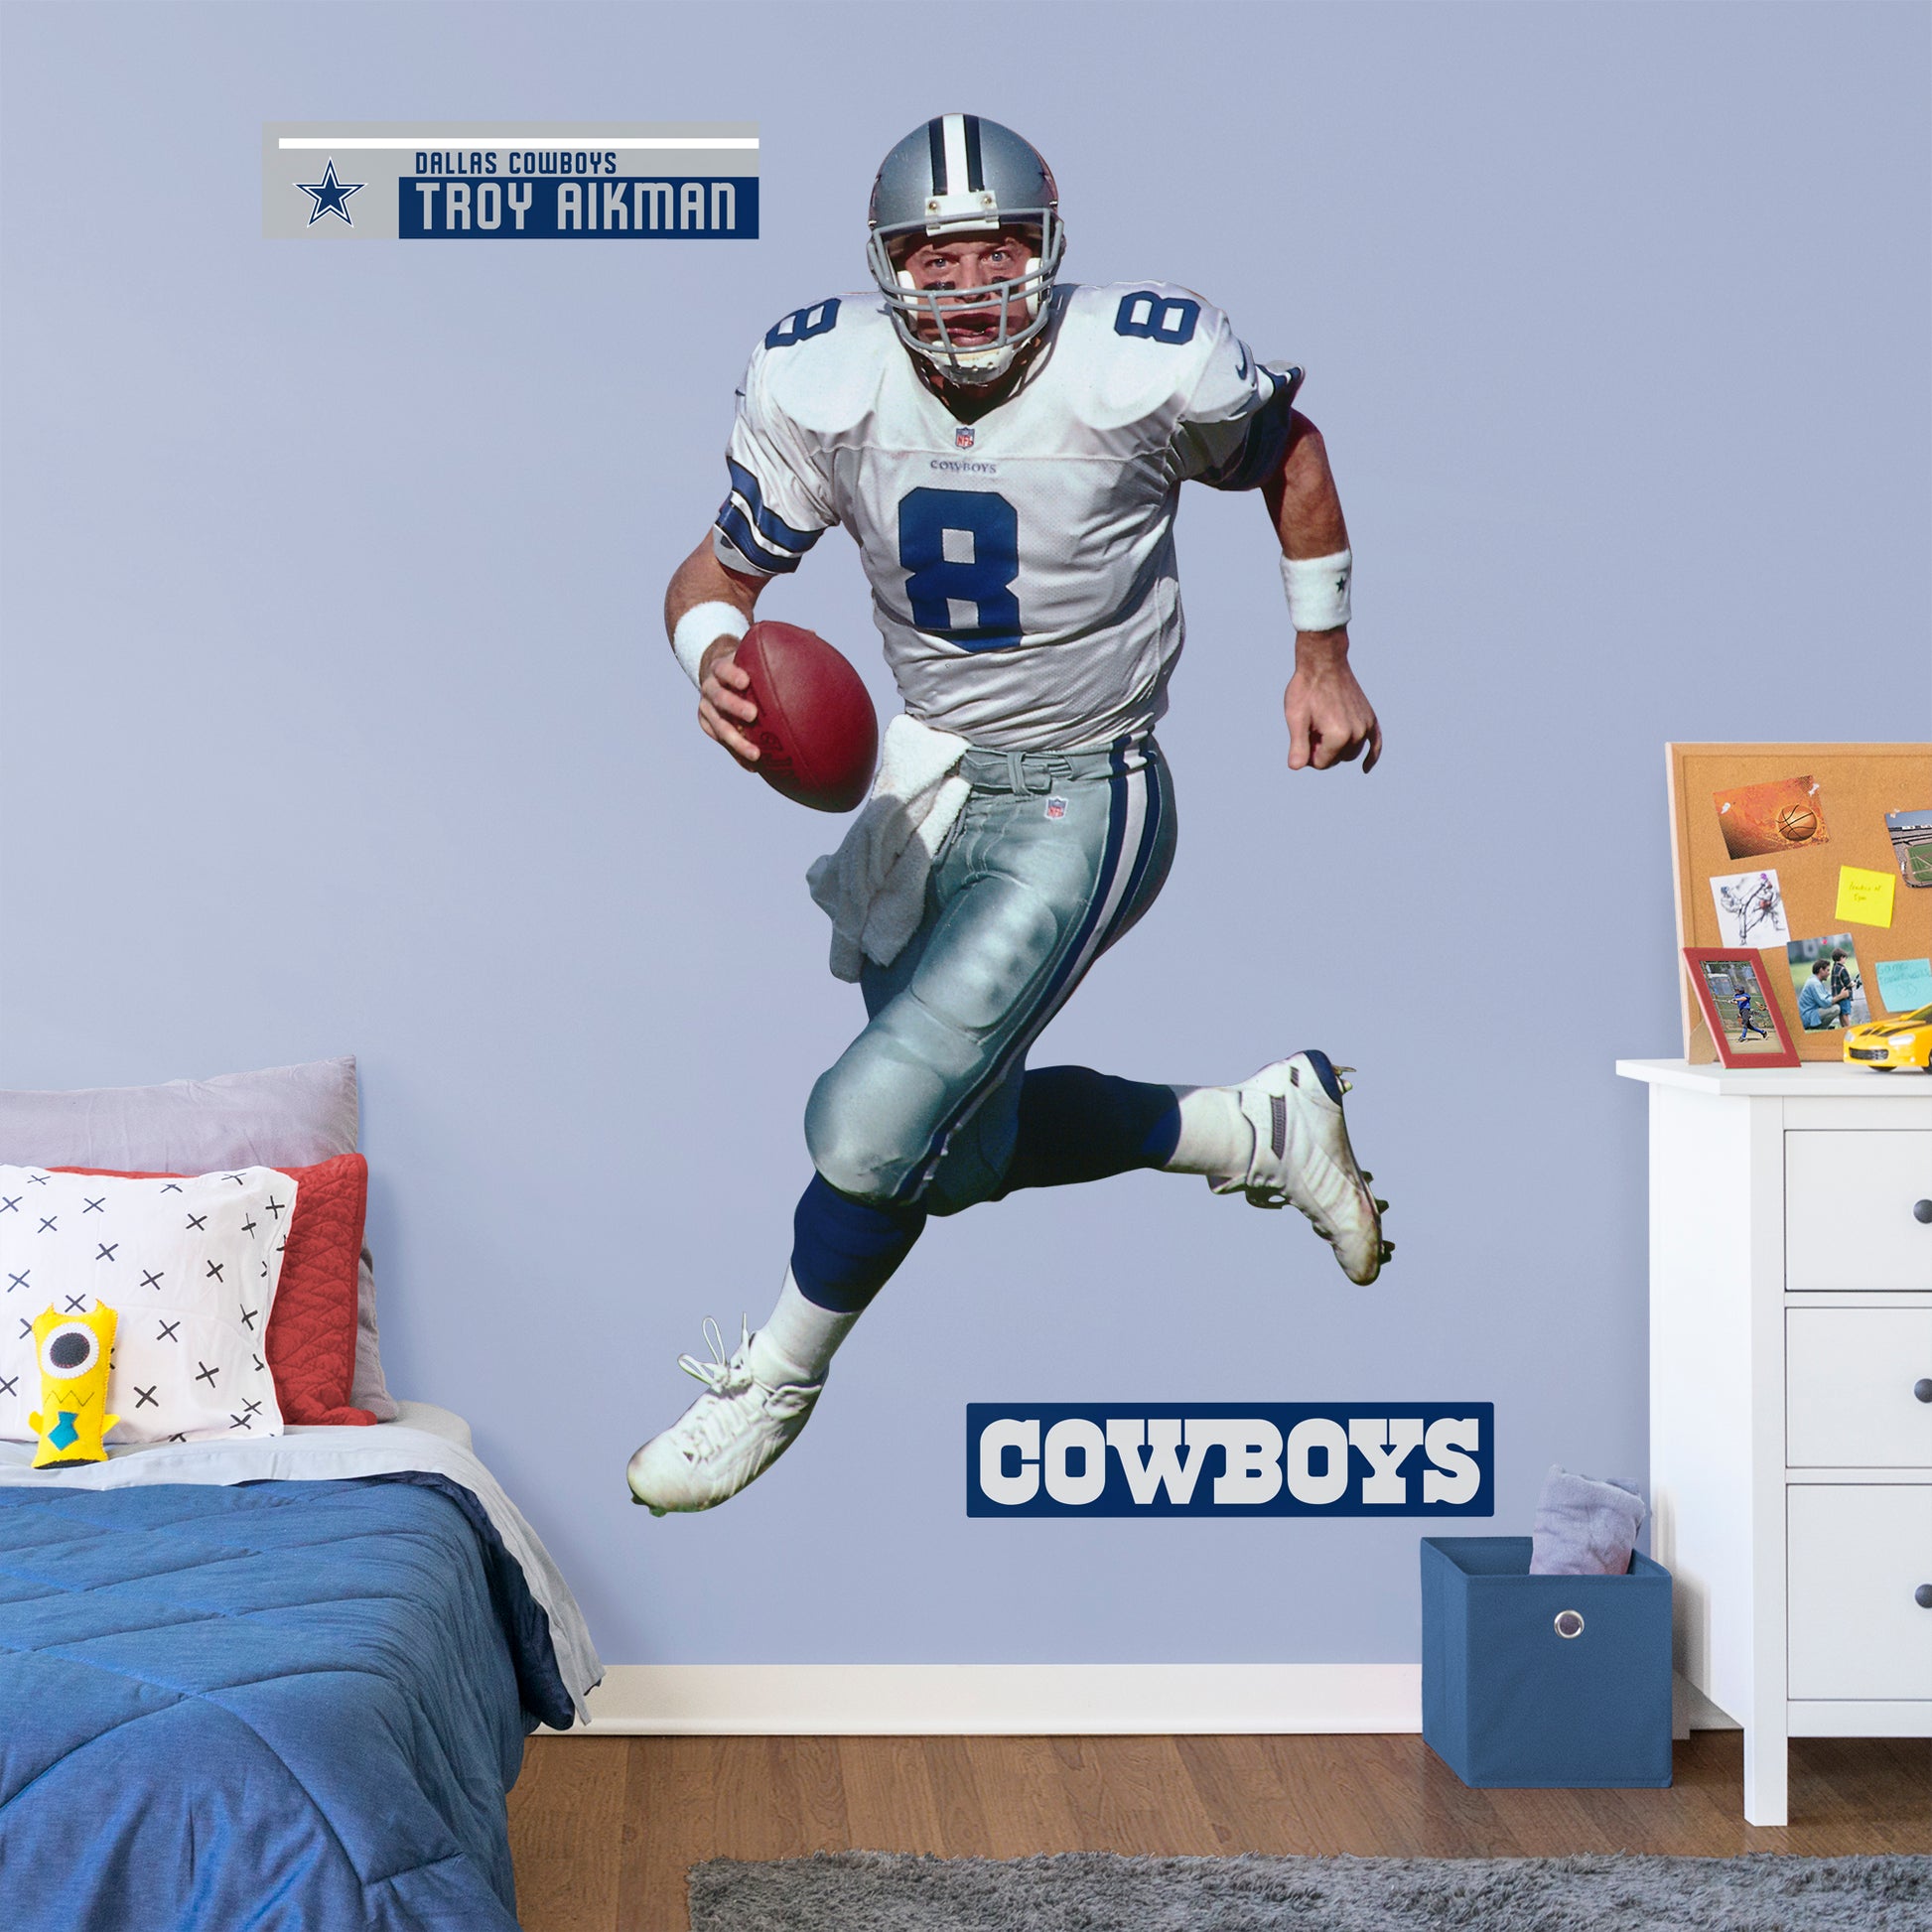 Life-Size Athlete + 2 Decals Quarterback with the Dallas Cowboys for 12 consecutive seasons and inducted in the Pro Football Hall of Fame in 2006, the IceMan can now be memorialized as one of the greats in your den or bedroom with this officially licensed NFL Troy Aikman: Legend removeable wall decal. Featuring the navy blue, metallic silver, royal blue, and white of America’s Team no flags will be called for this durable decal that ensures Aikman can be making passes for seasons to come.